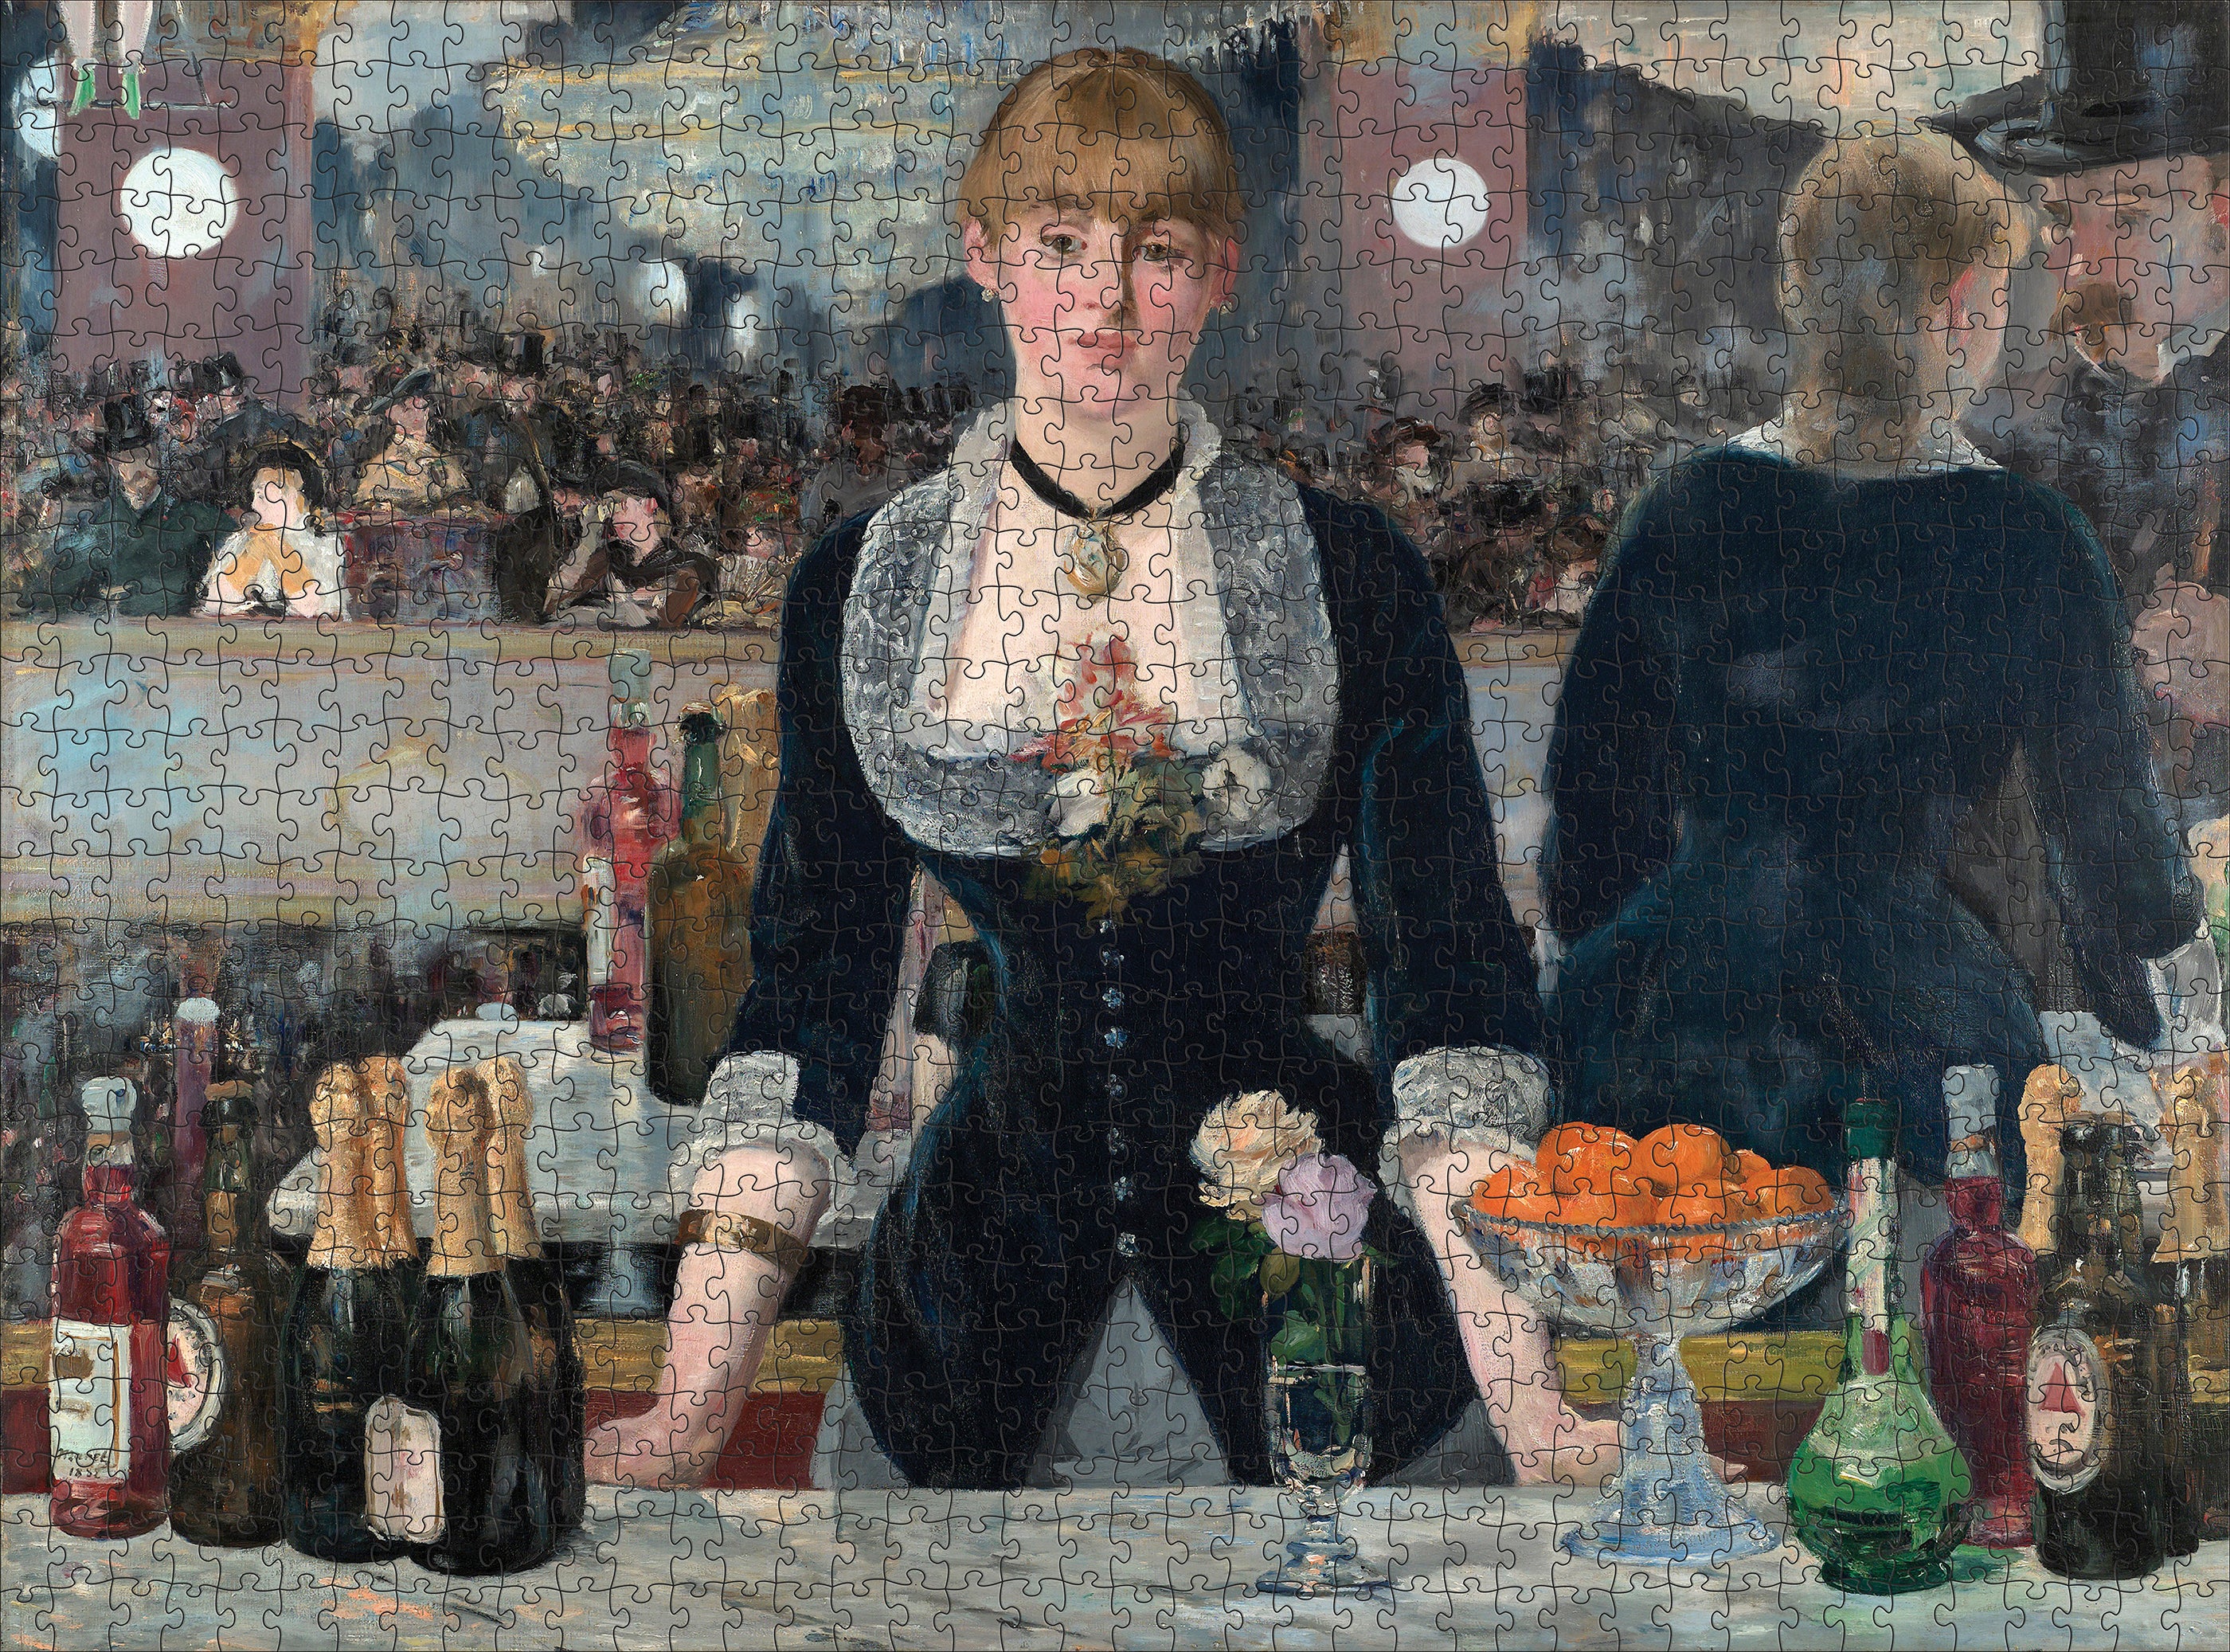 Pomegranate Edouard Manet "A Bar at the Follies-Bergere" 1000 Piece Puzzle